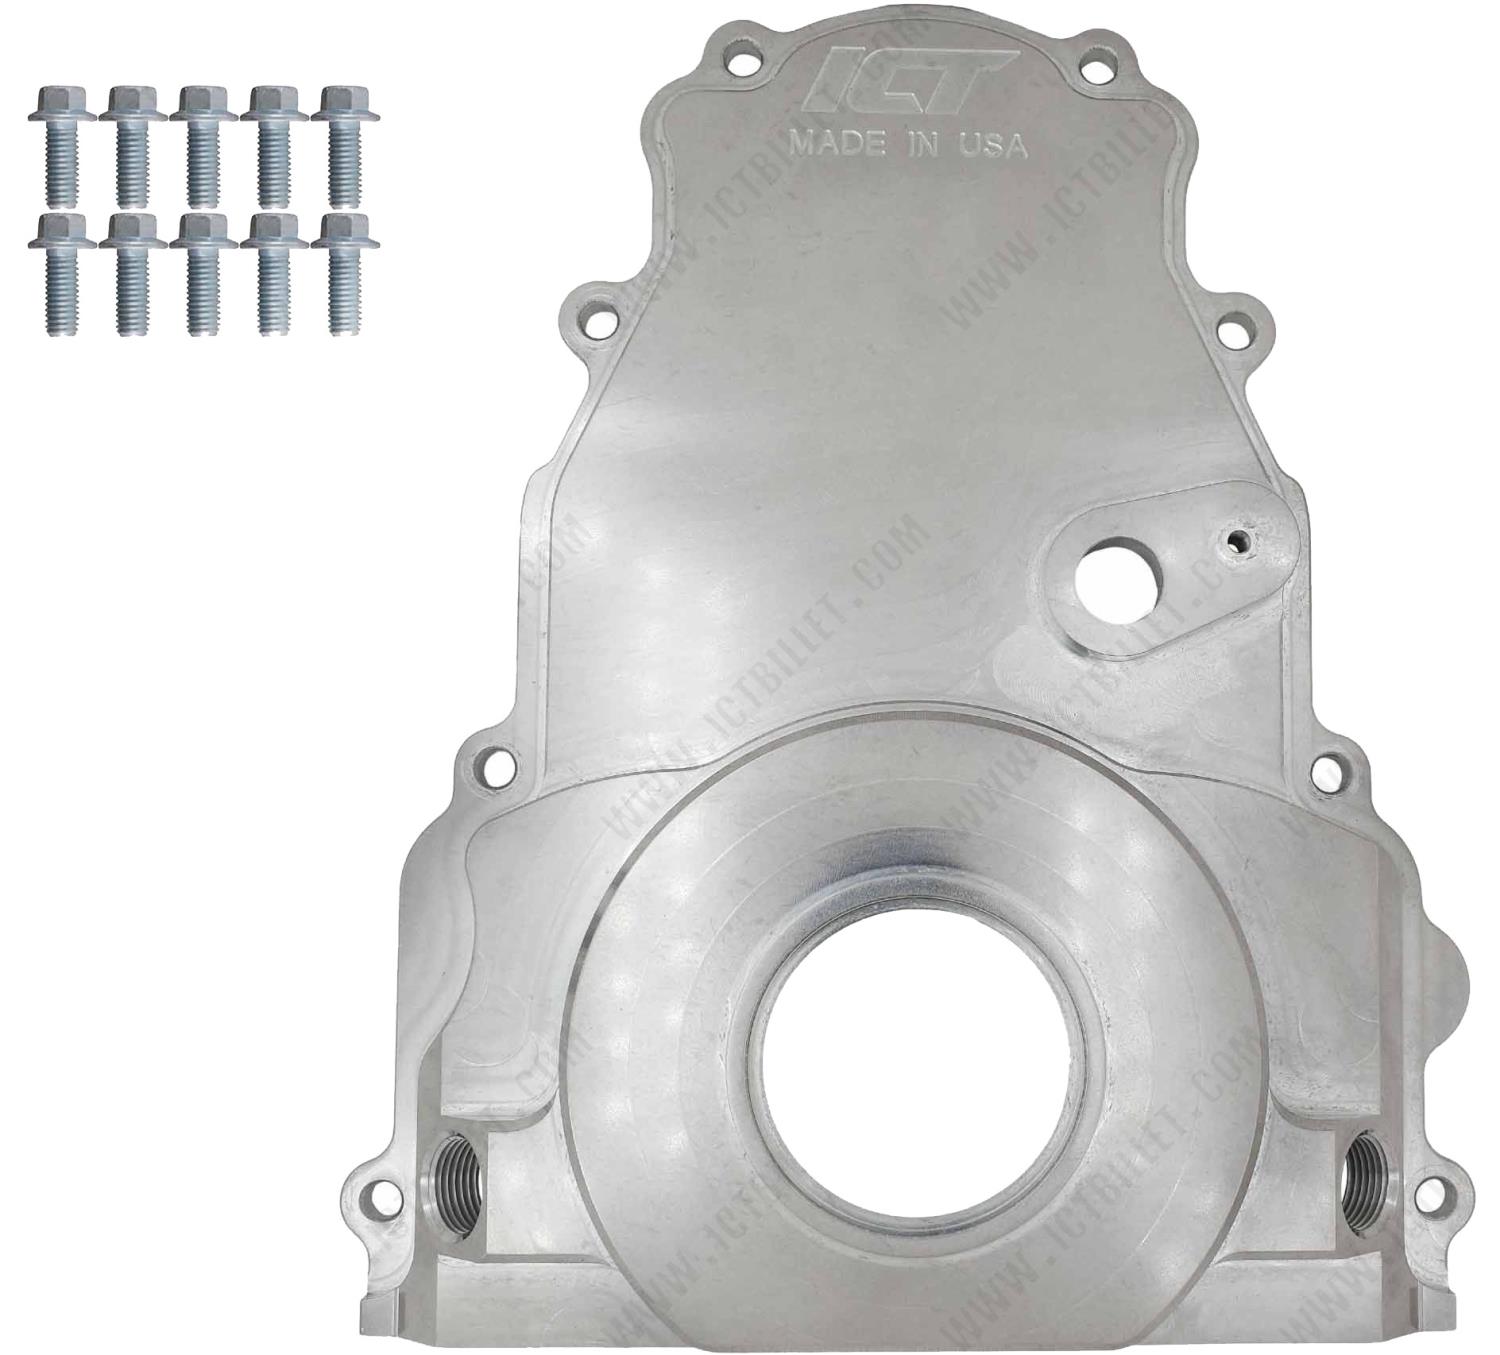 551595-LS01 Billet Timing Chain Cover w/(2) Turbo Oil Returns Fits GM Gen IV LS Engine [-10AN ORB]